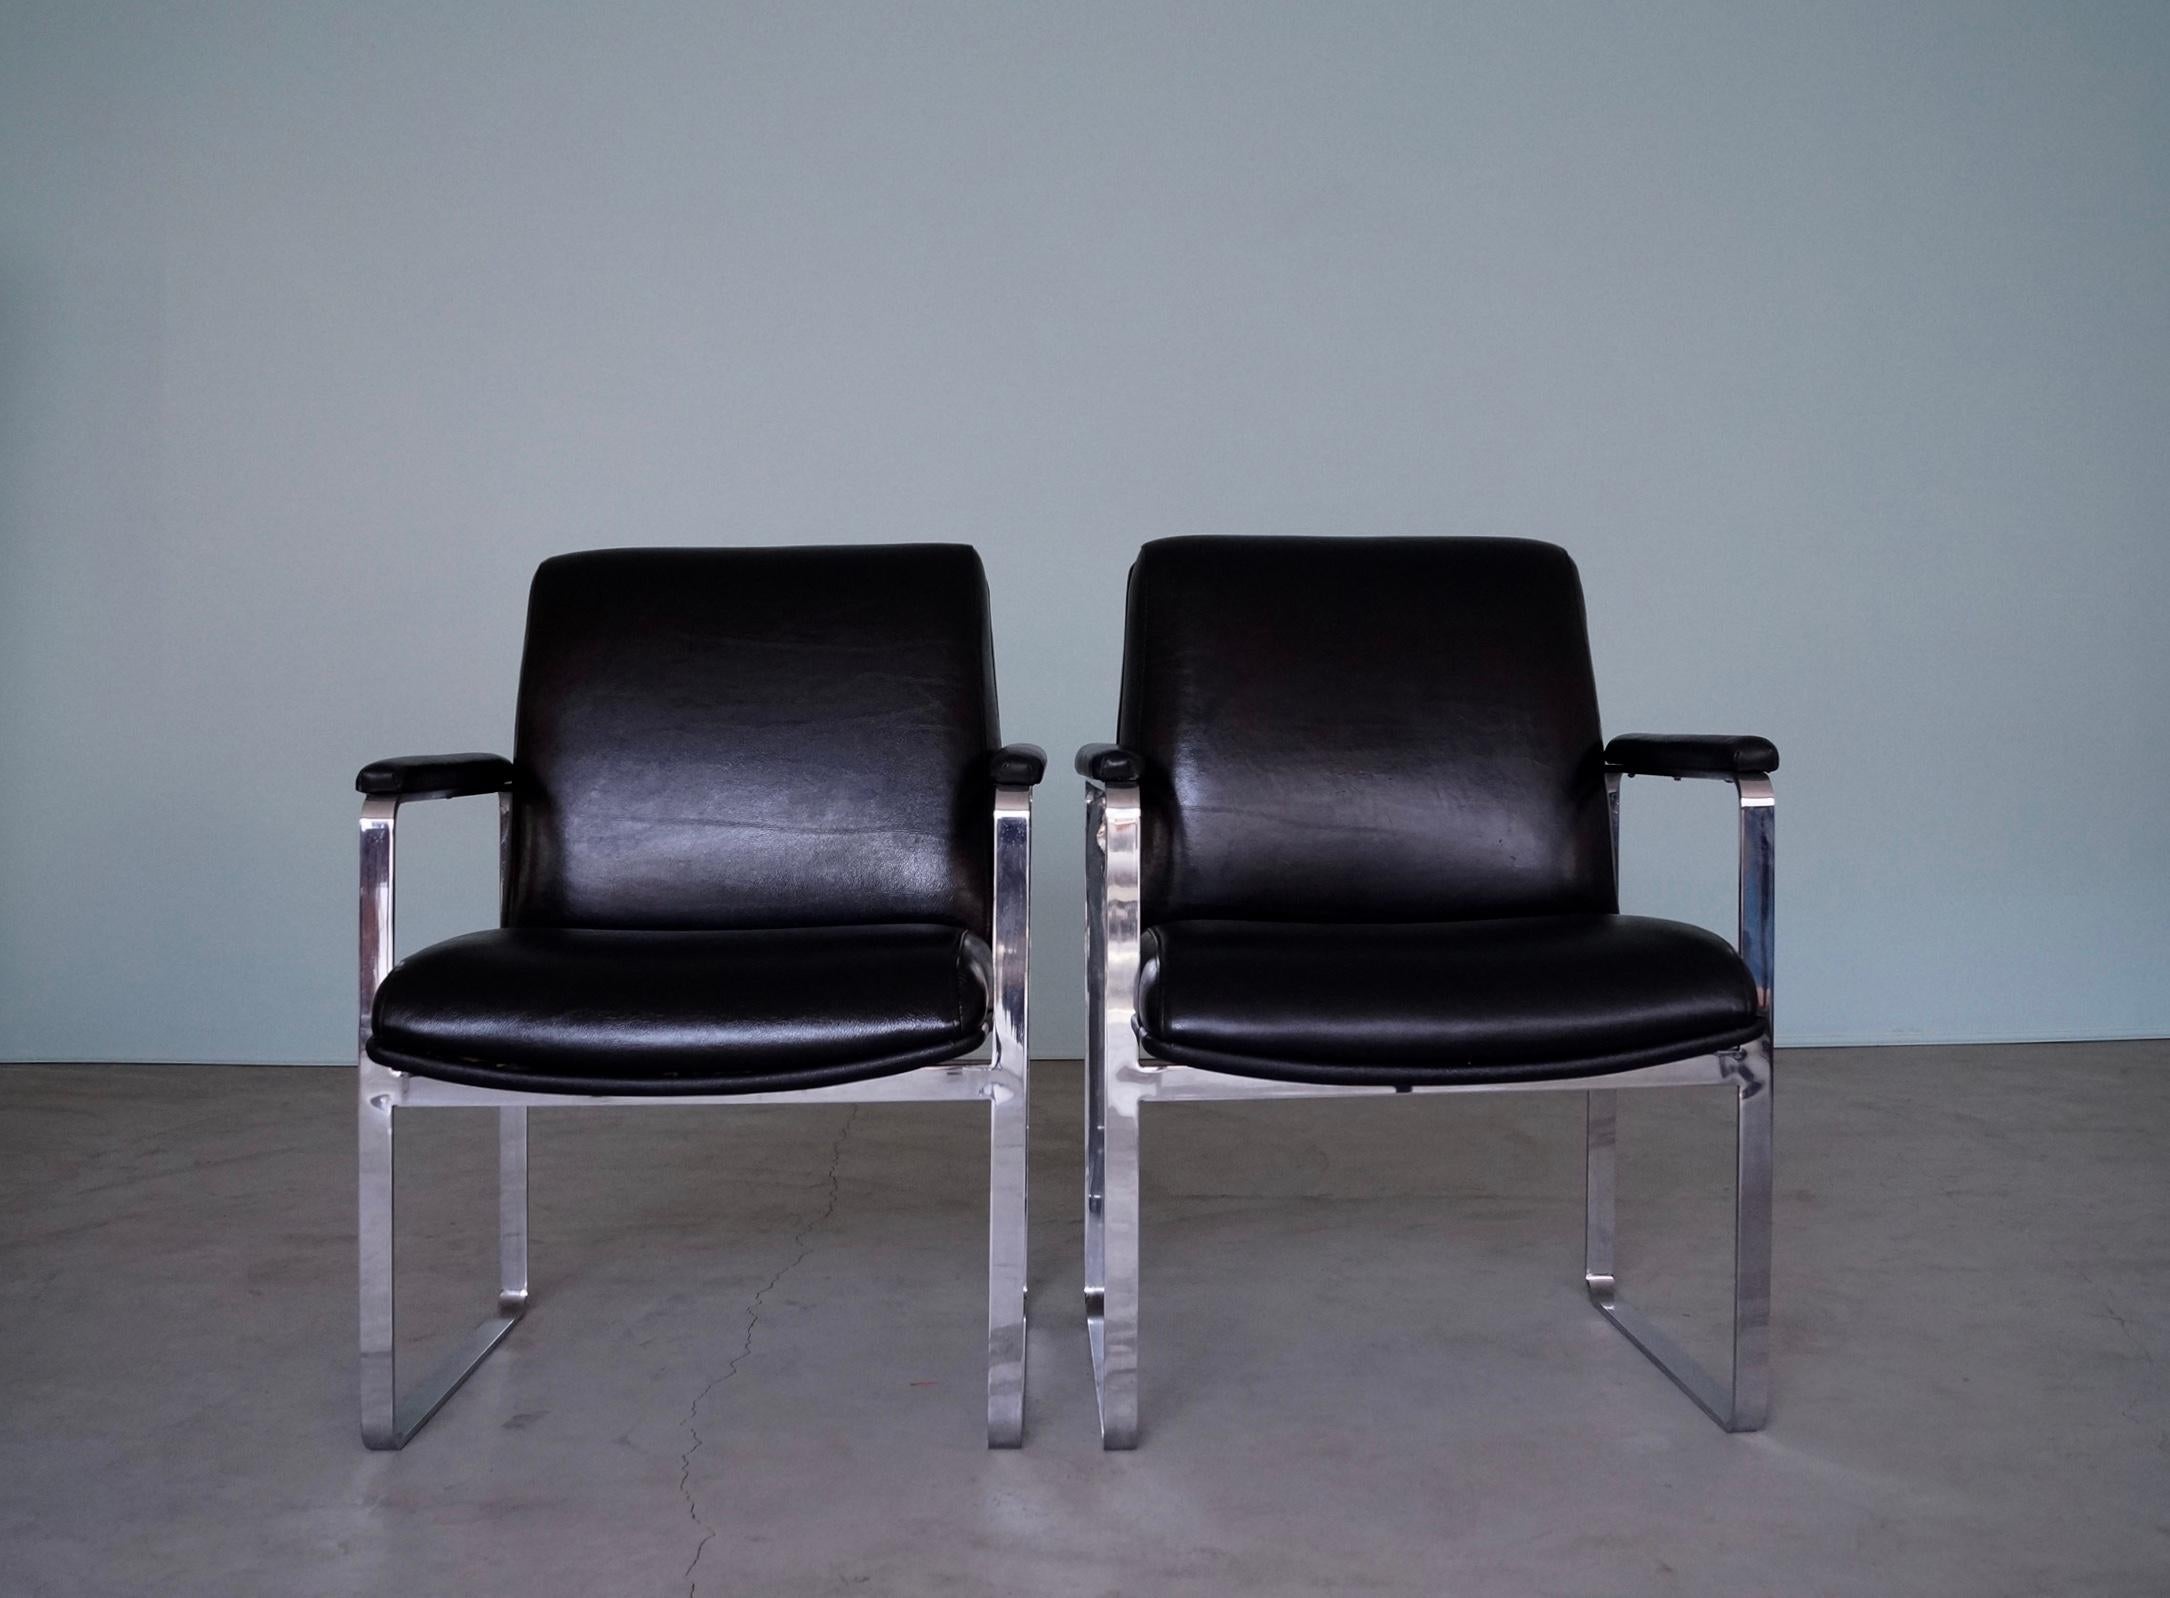 American 1960's Mid-Century Modern Flat Bar Chrome & Black Leather Armchairs - a Pair For Sale